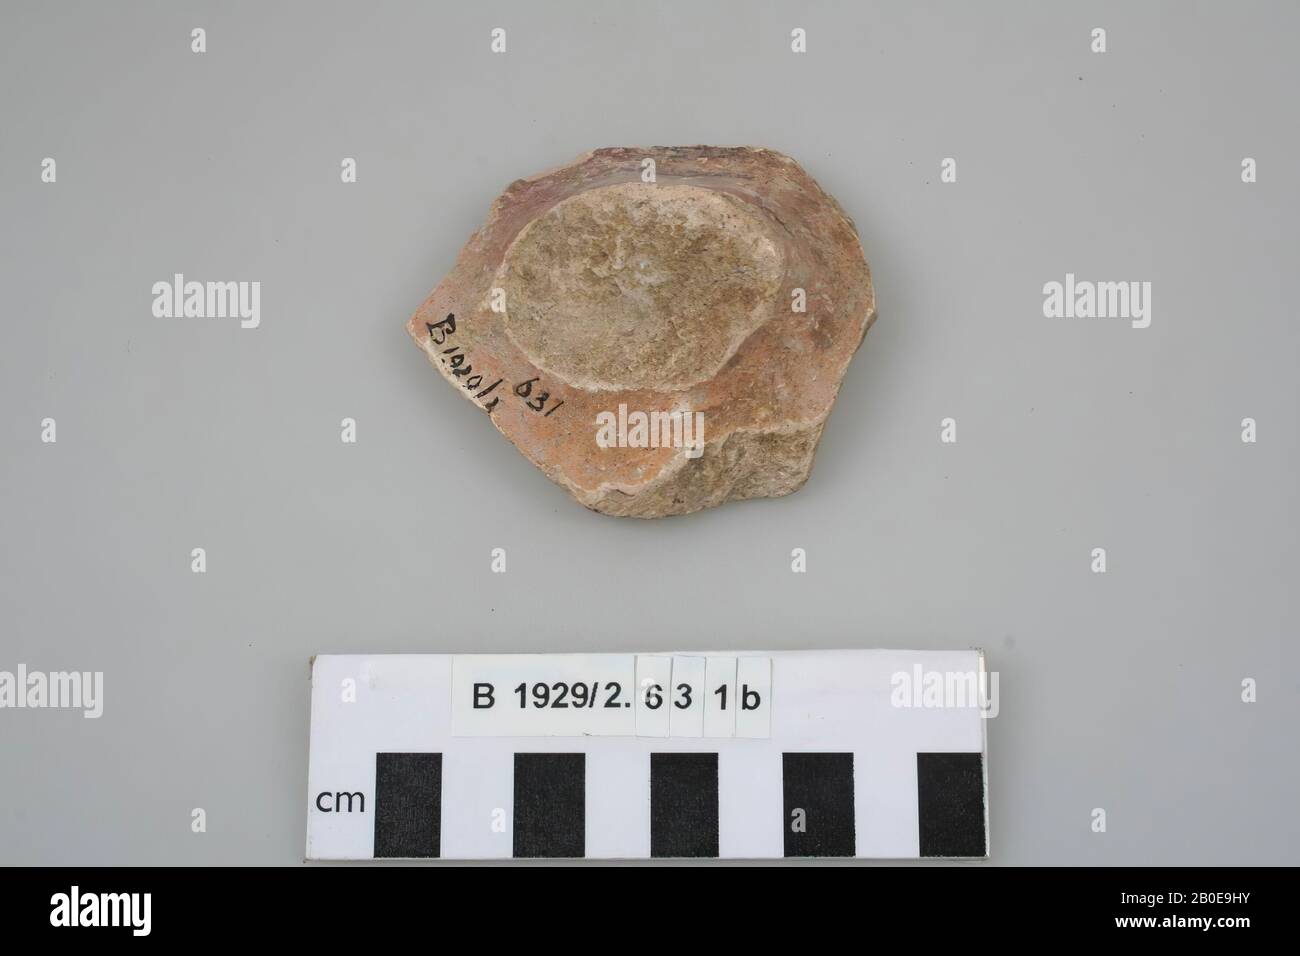 Fragment of a handle., Shard, earthenware, br: 7.1 cm, Israel Stock Photo